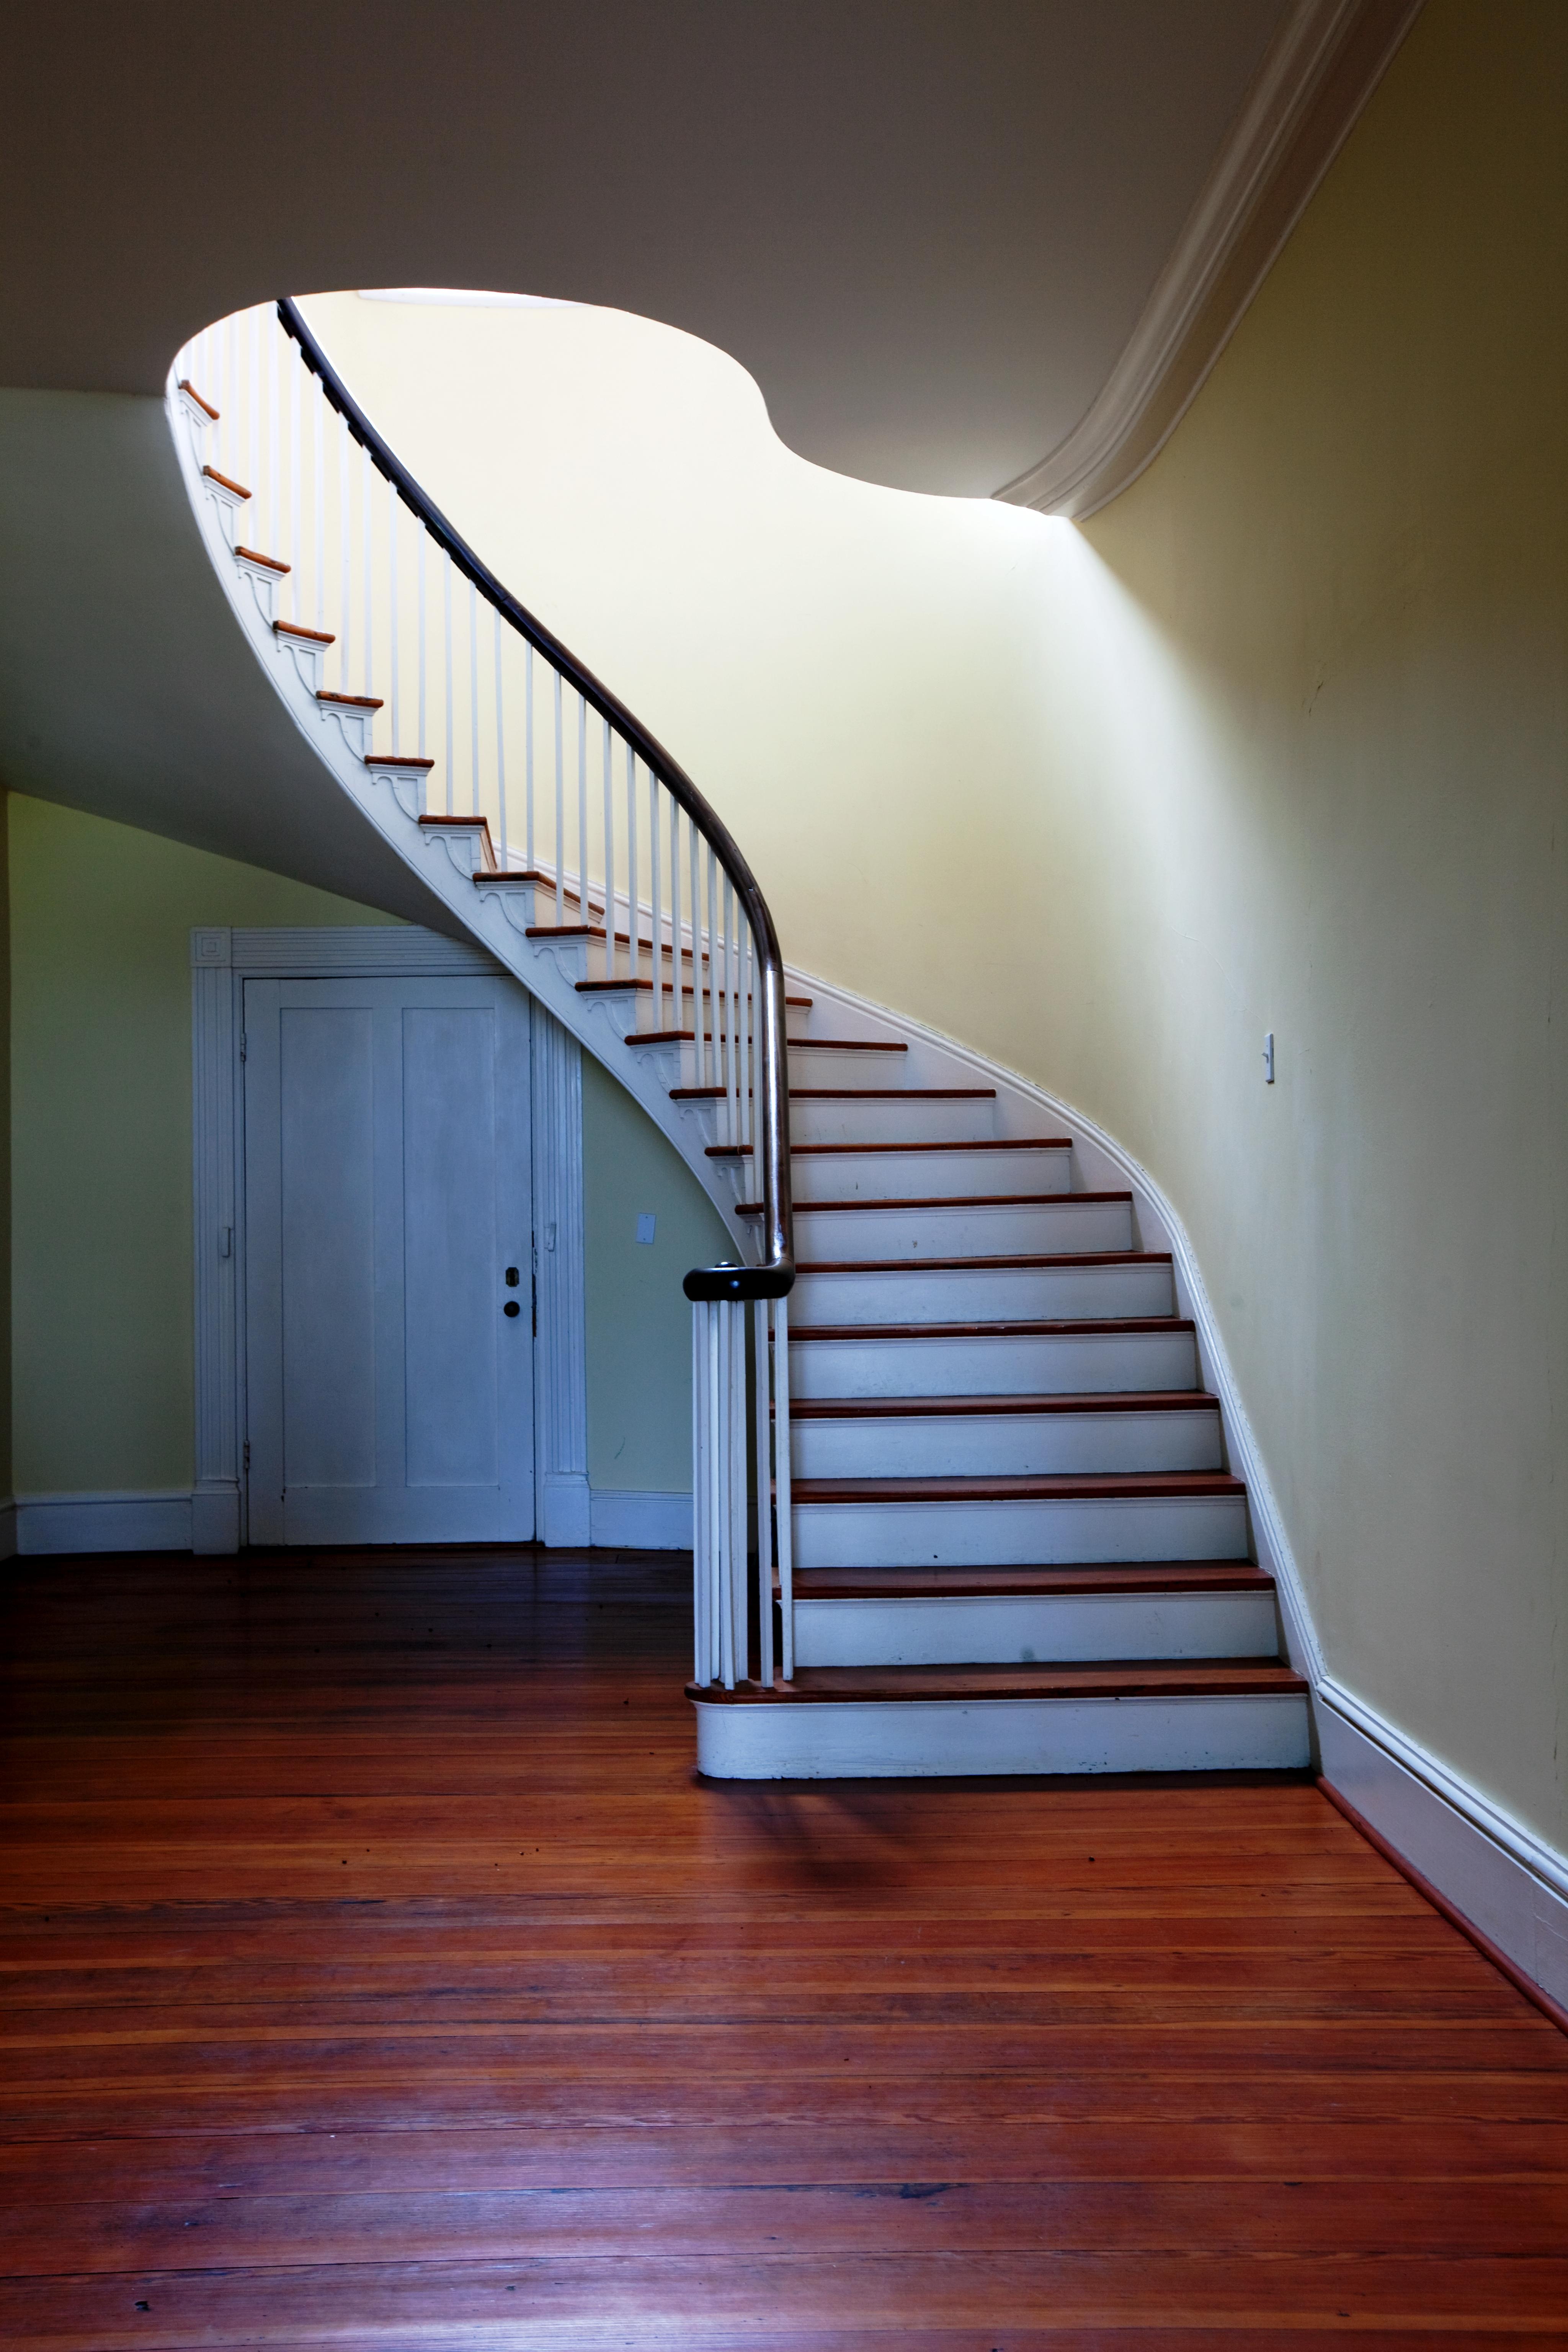 Stairs at the House, Architecture, Construction, Residence, Stair, HQ Photo